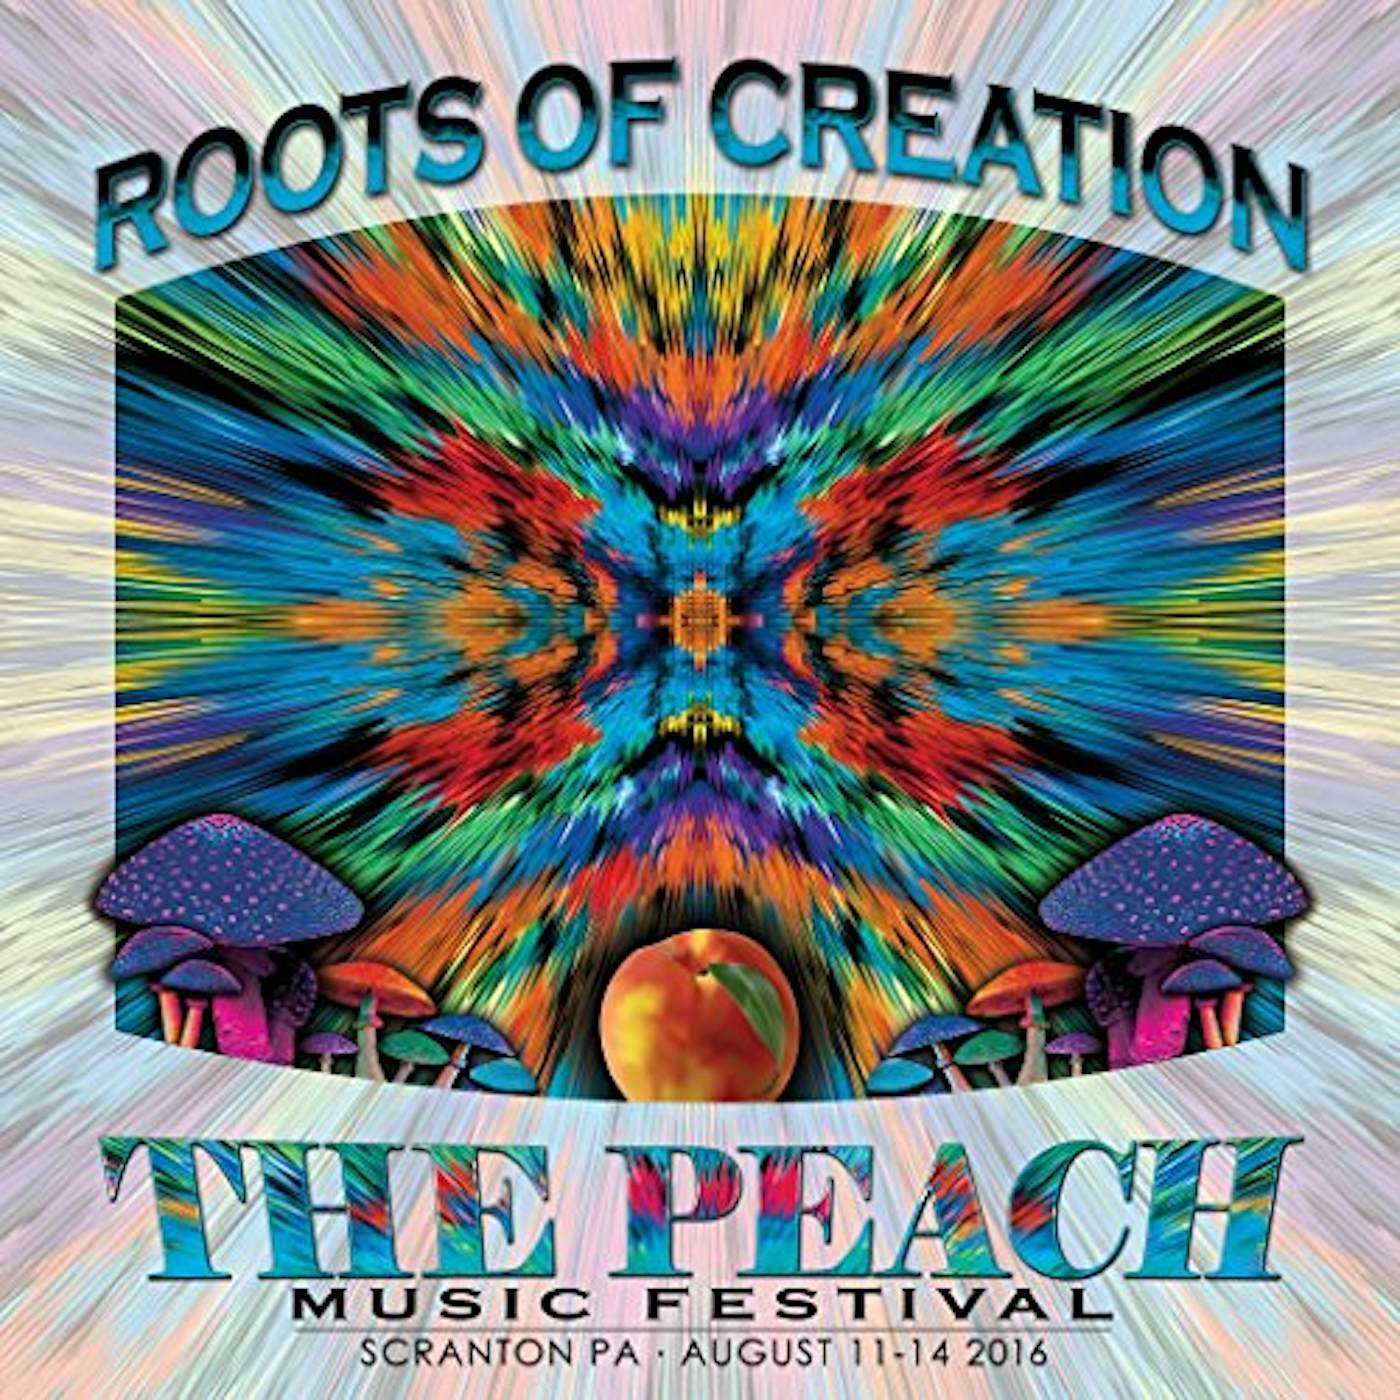 Roots of Creation PEACH MUSIC FESTIVAL 2016 CD